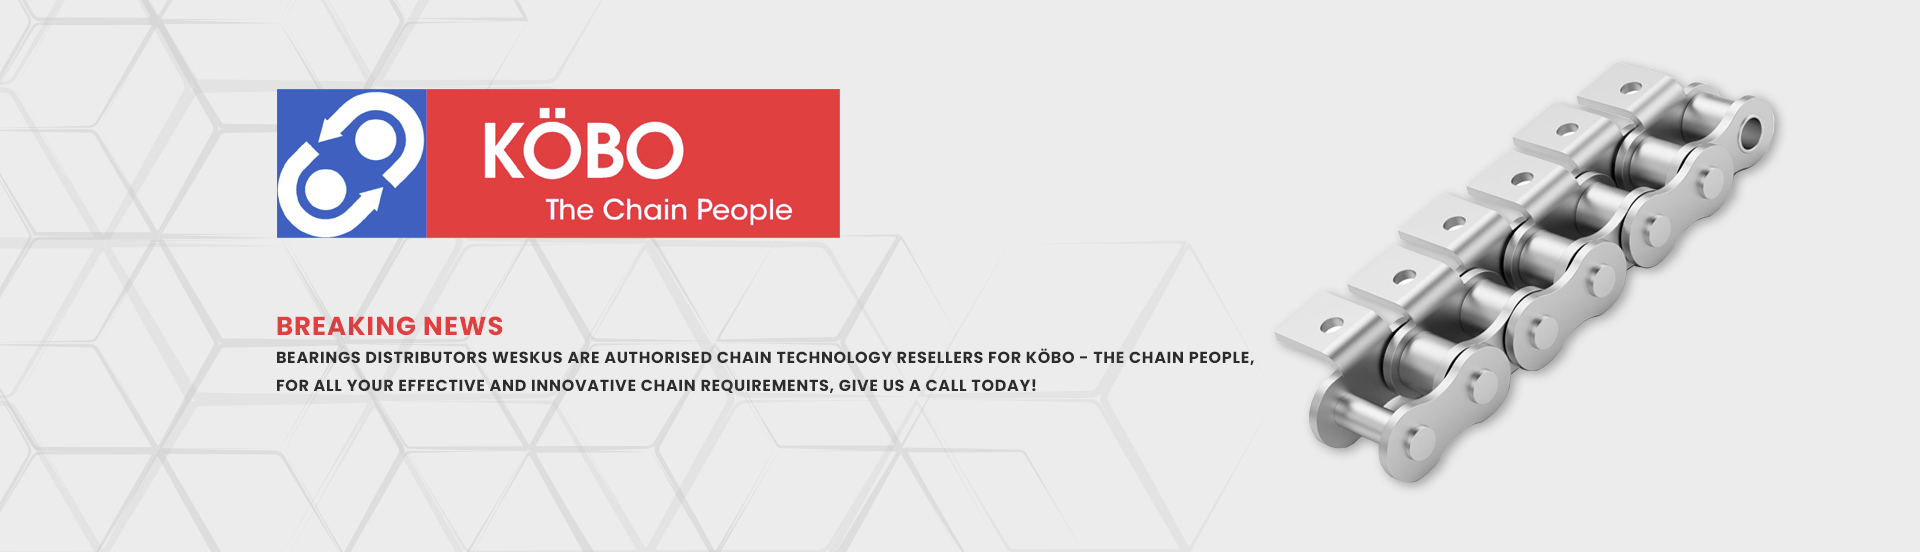 BD Weksus is a distributor of KOBO The Chain People